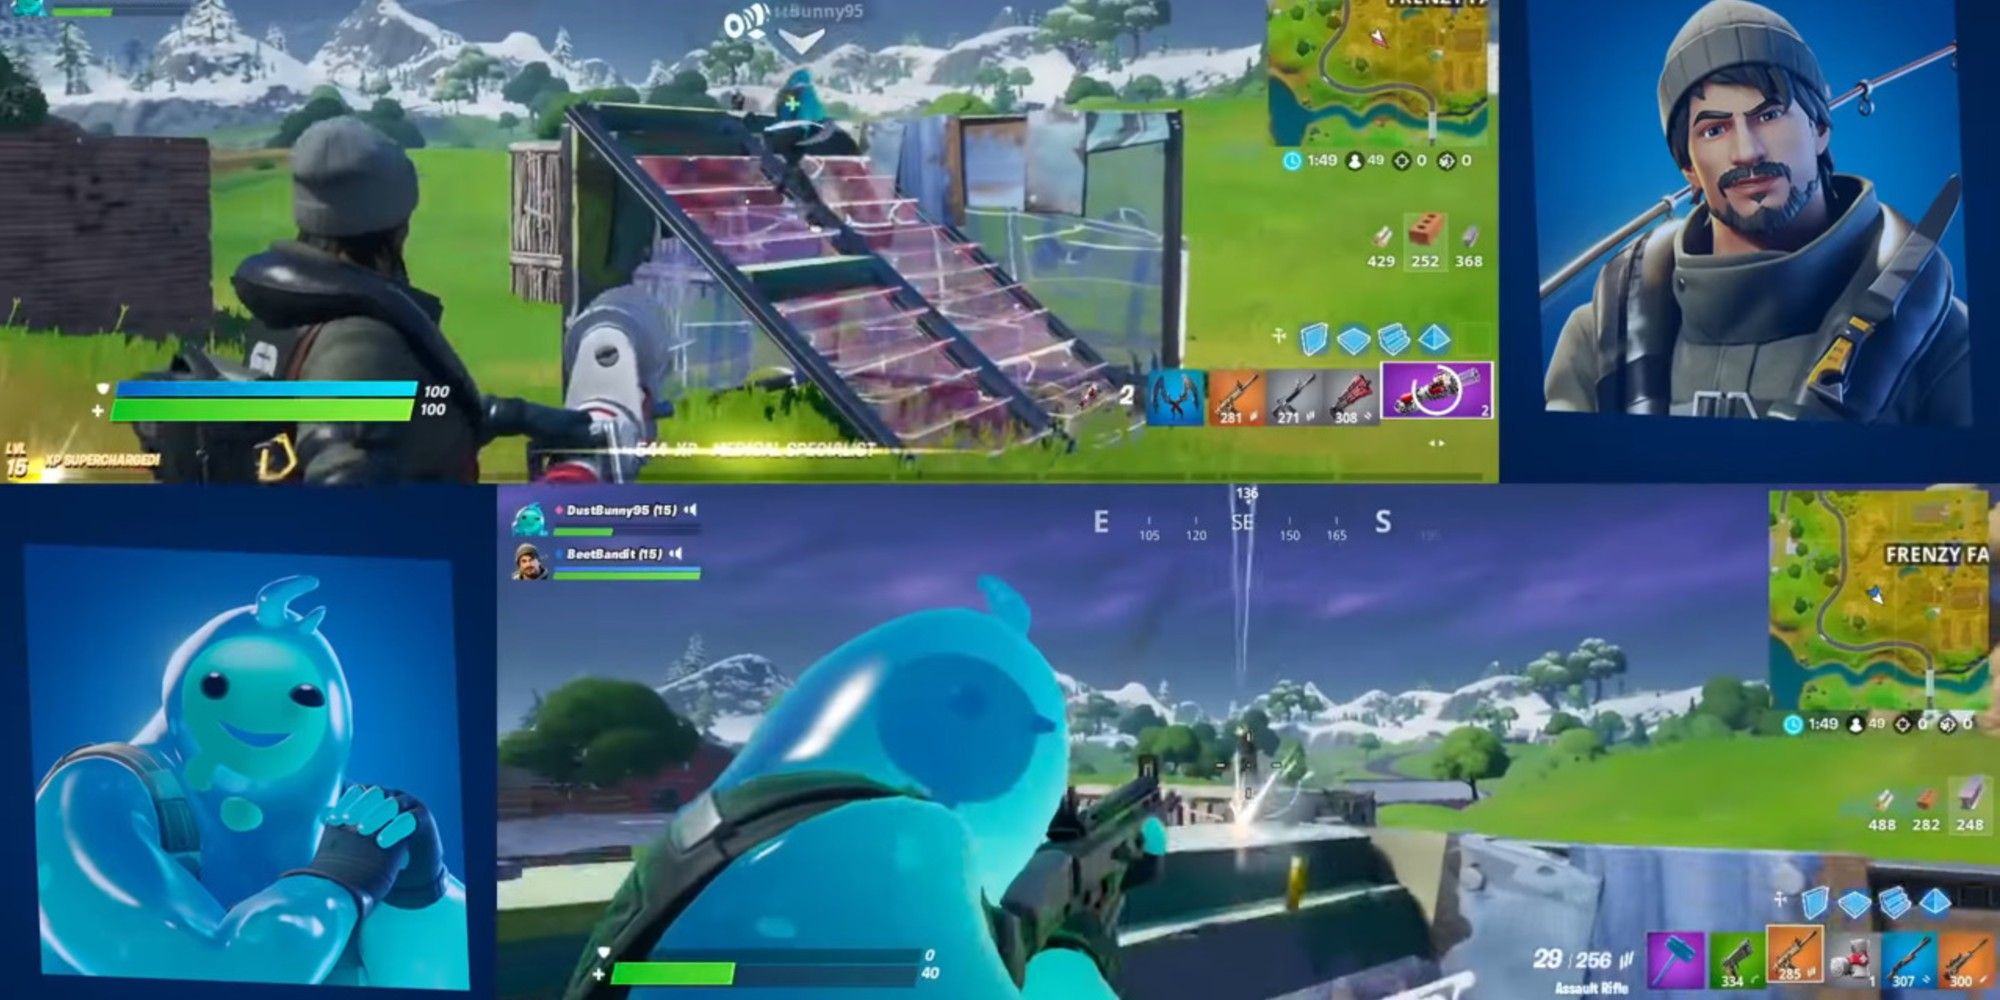 Can You Still Play Split Screen On Fortnite 2020 Fortnite How To Set Up Split Screen Play Screen Rant